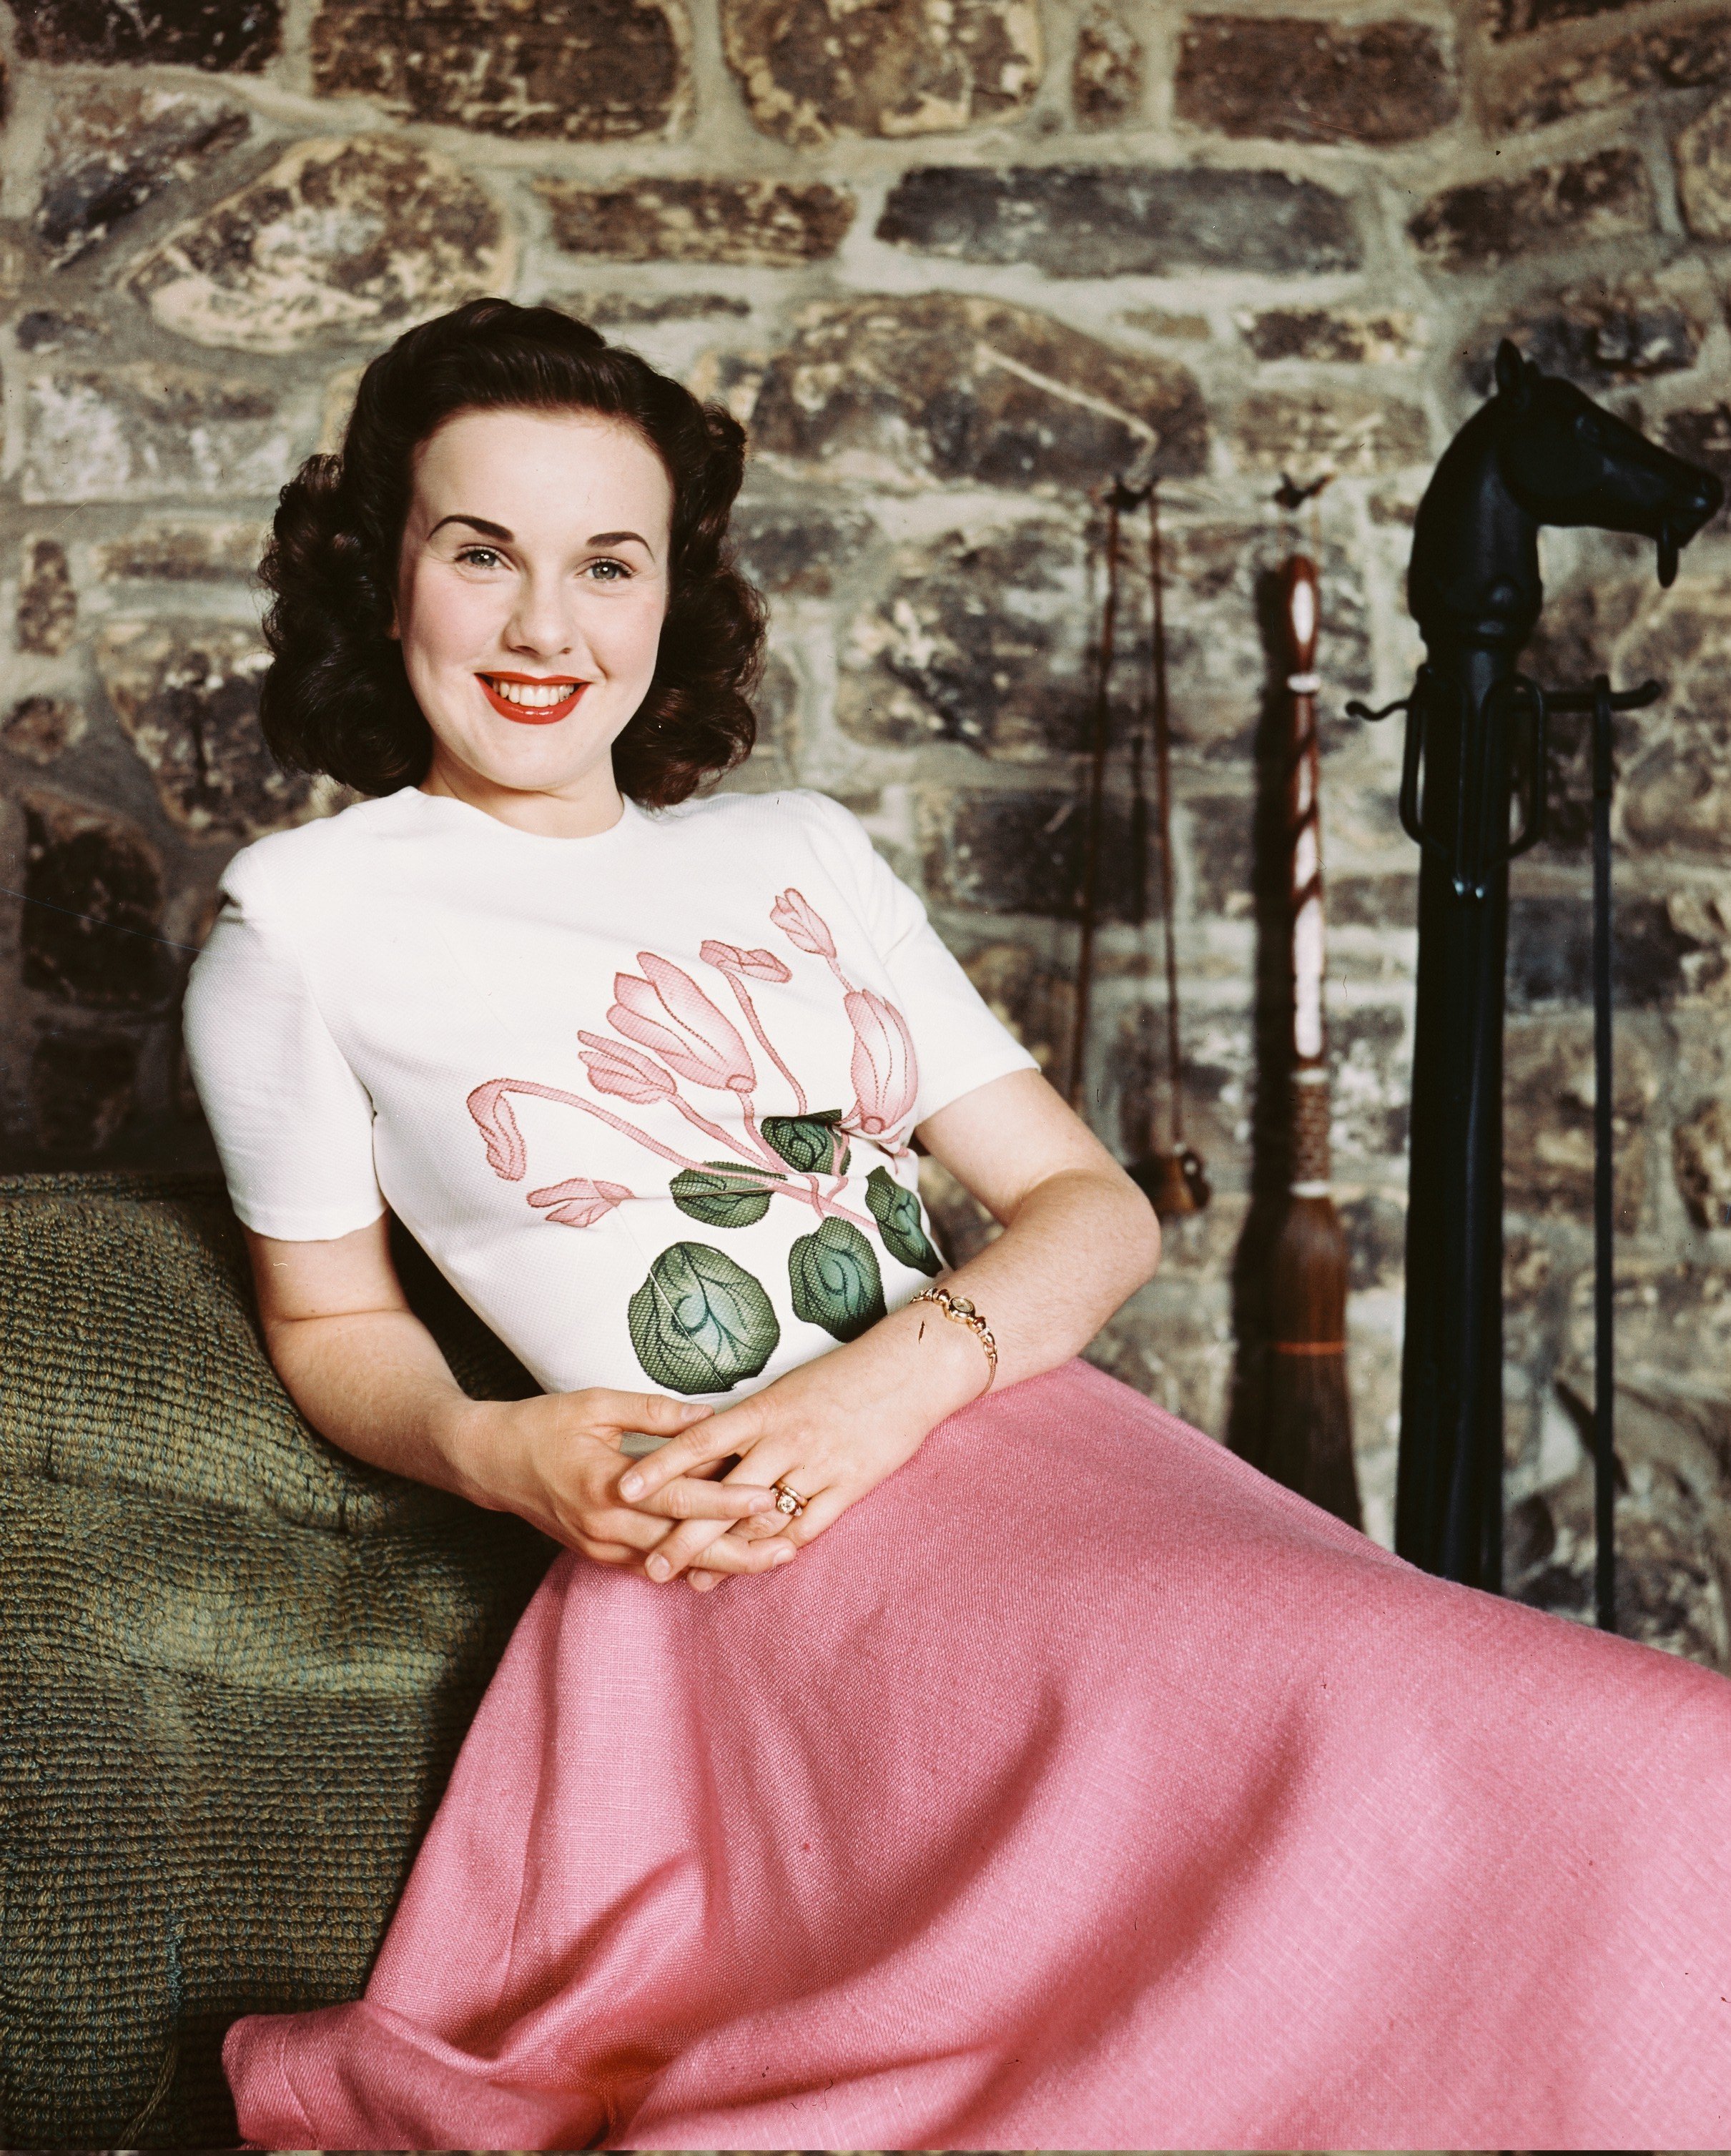 Deanna Durbin poses with a flowered blouse and pink skirt in circa 1955 | Photo: Getty Images